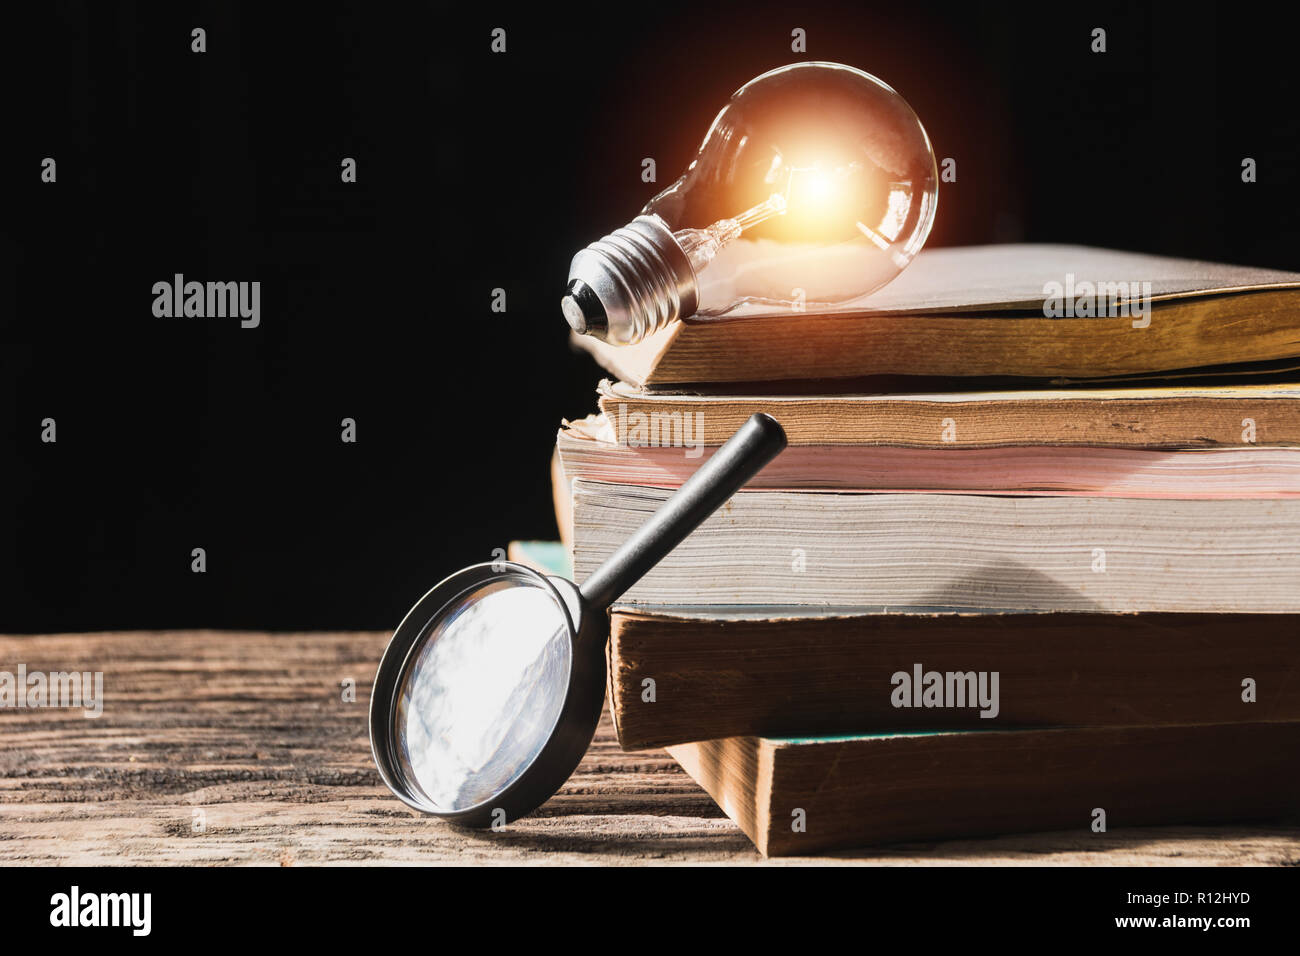 Light bulb and pile of book on wooden table and copy space for insert text. Stock Photo